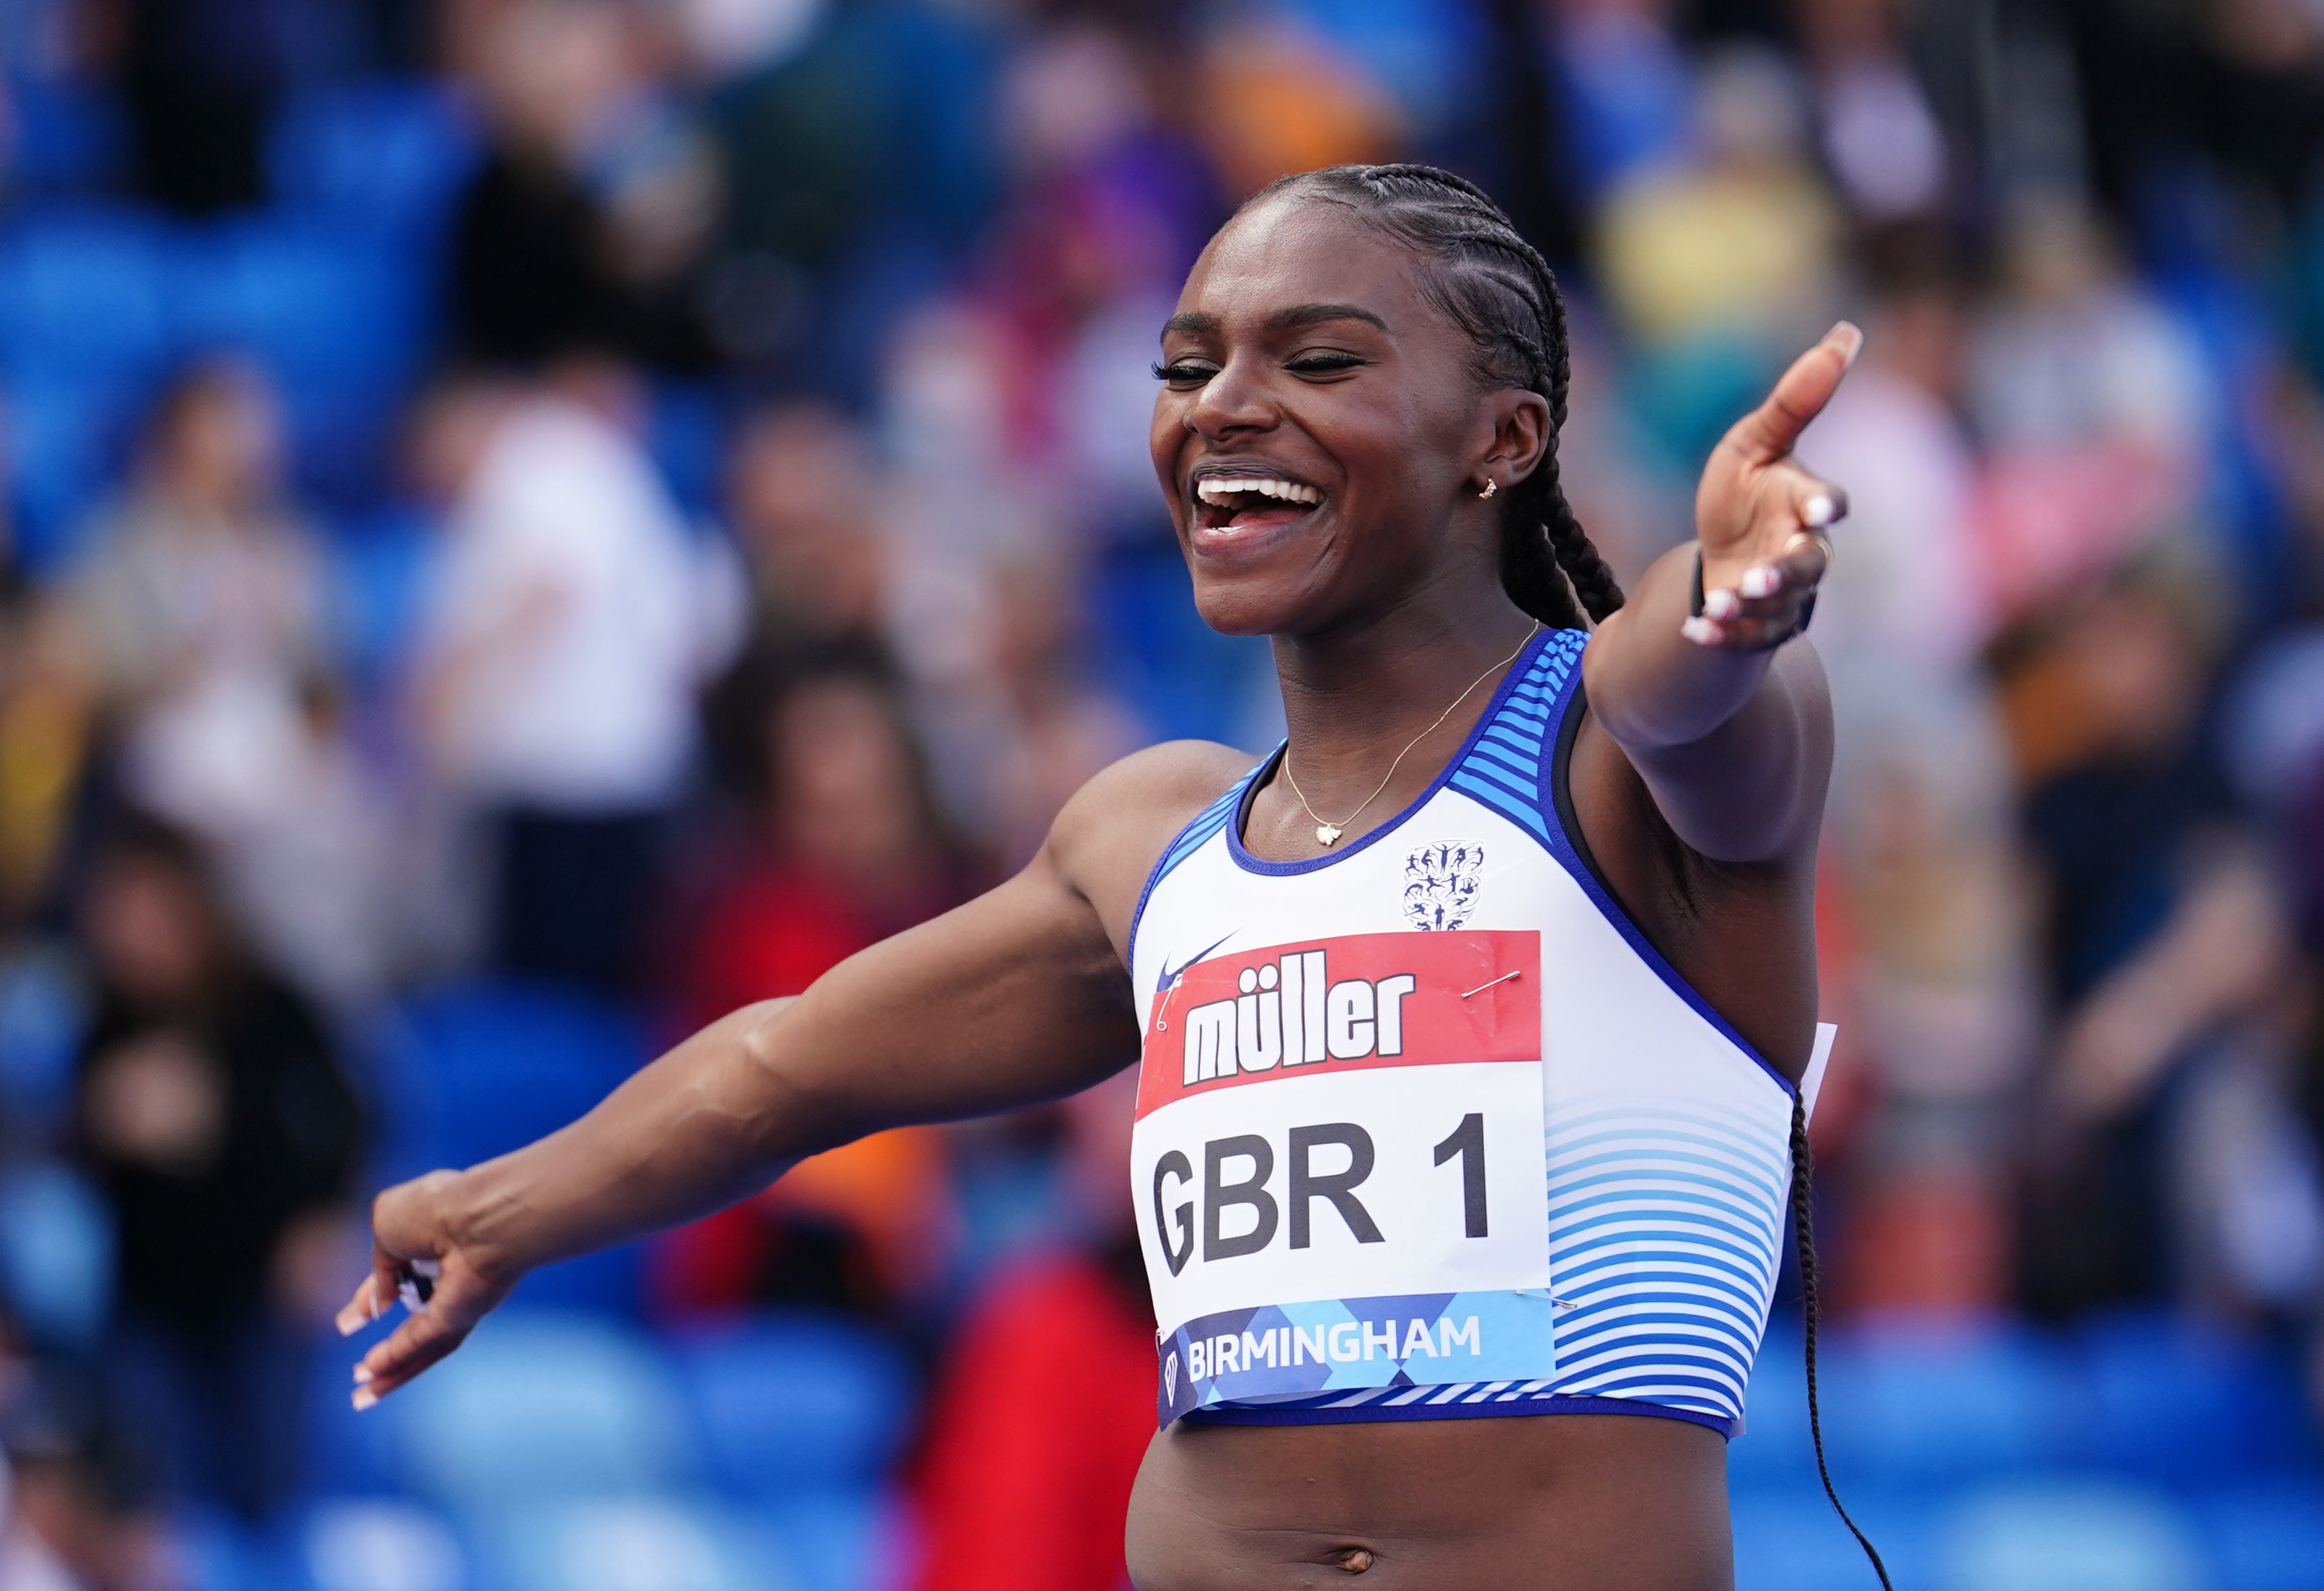 Dina Asher-Smith (GB) celebrates after running a Personal Best in the  women's 200m during the Sainsbury's Birmingham Grand Prix IAAF Diamond  League Meeting at Alexandra Stadium, Birmingham, West Midlands, England on  June